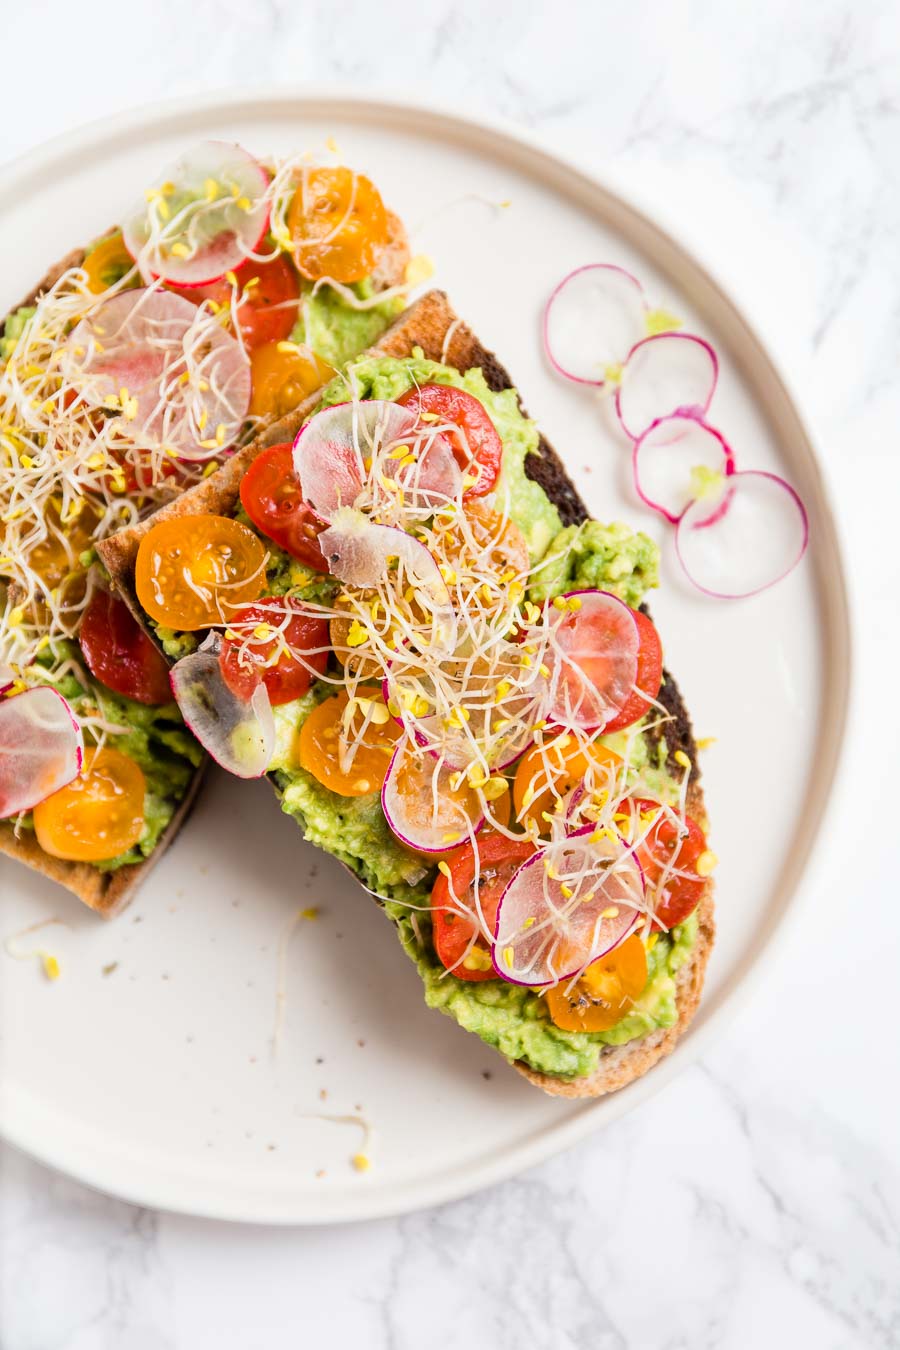 Slices of artisan bread toasted, spread with avocado, topped with sliced cherry tomatoes, radish and bean sprouts on a white, shallow plate